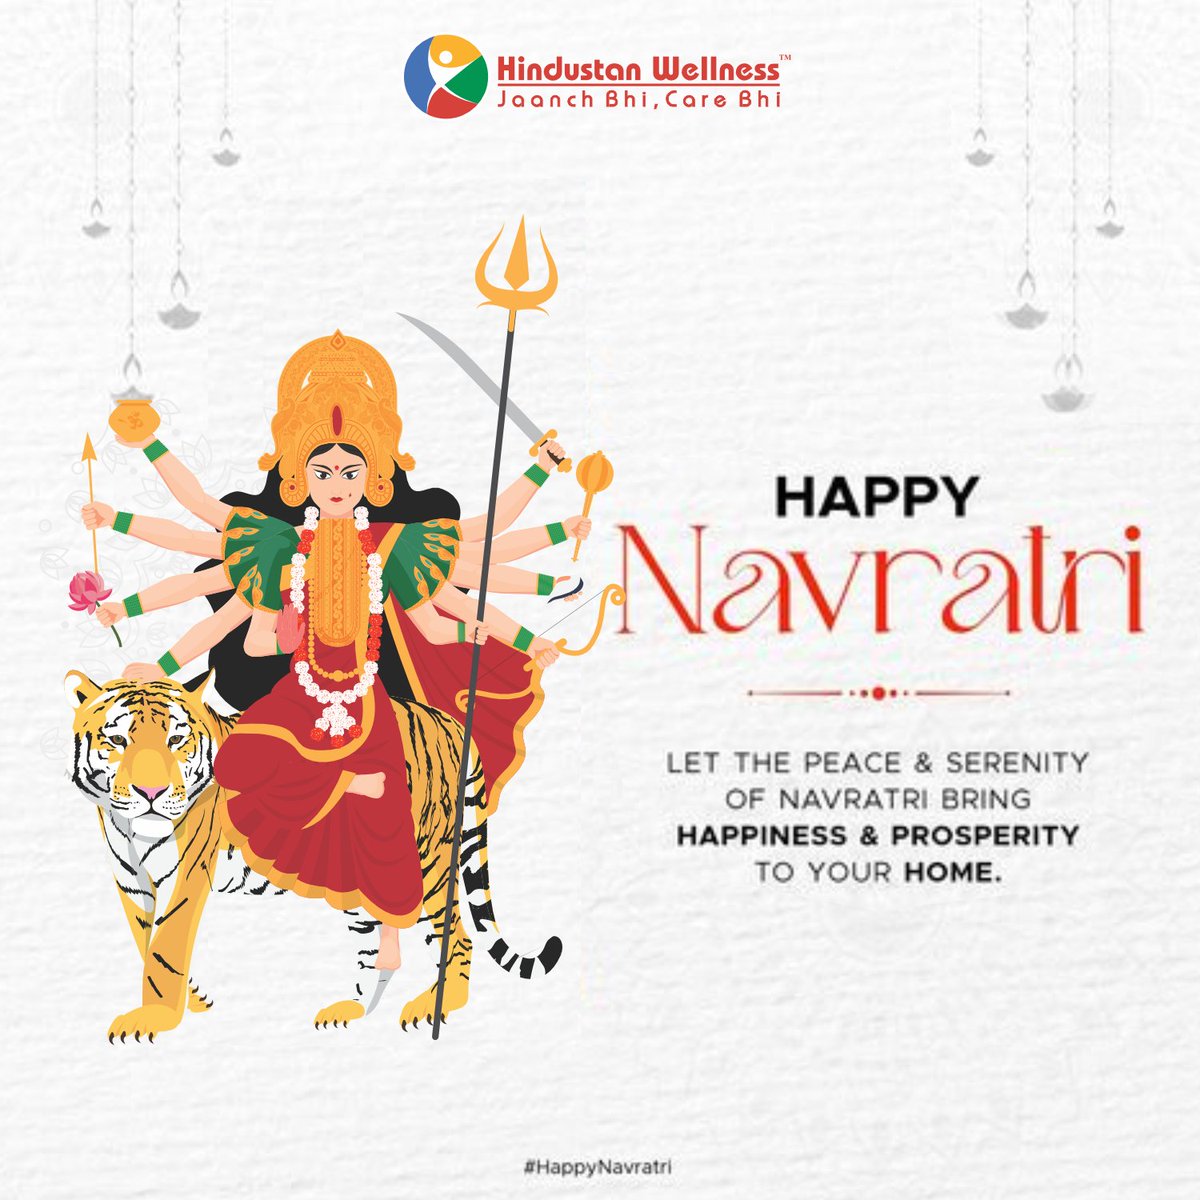 May you be blessed with the nine forms of Maa Durga on these nine auspicious days. May this festive season be filled with abundant blessings of good health, happiness, and harmony. 

Happy Chaitra Navratri 2024!

#navratri #navratrispecial #goodhealth #HindustanWellness